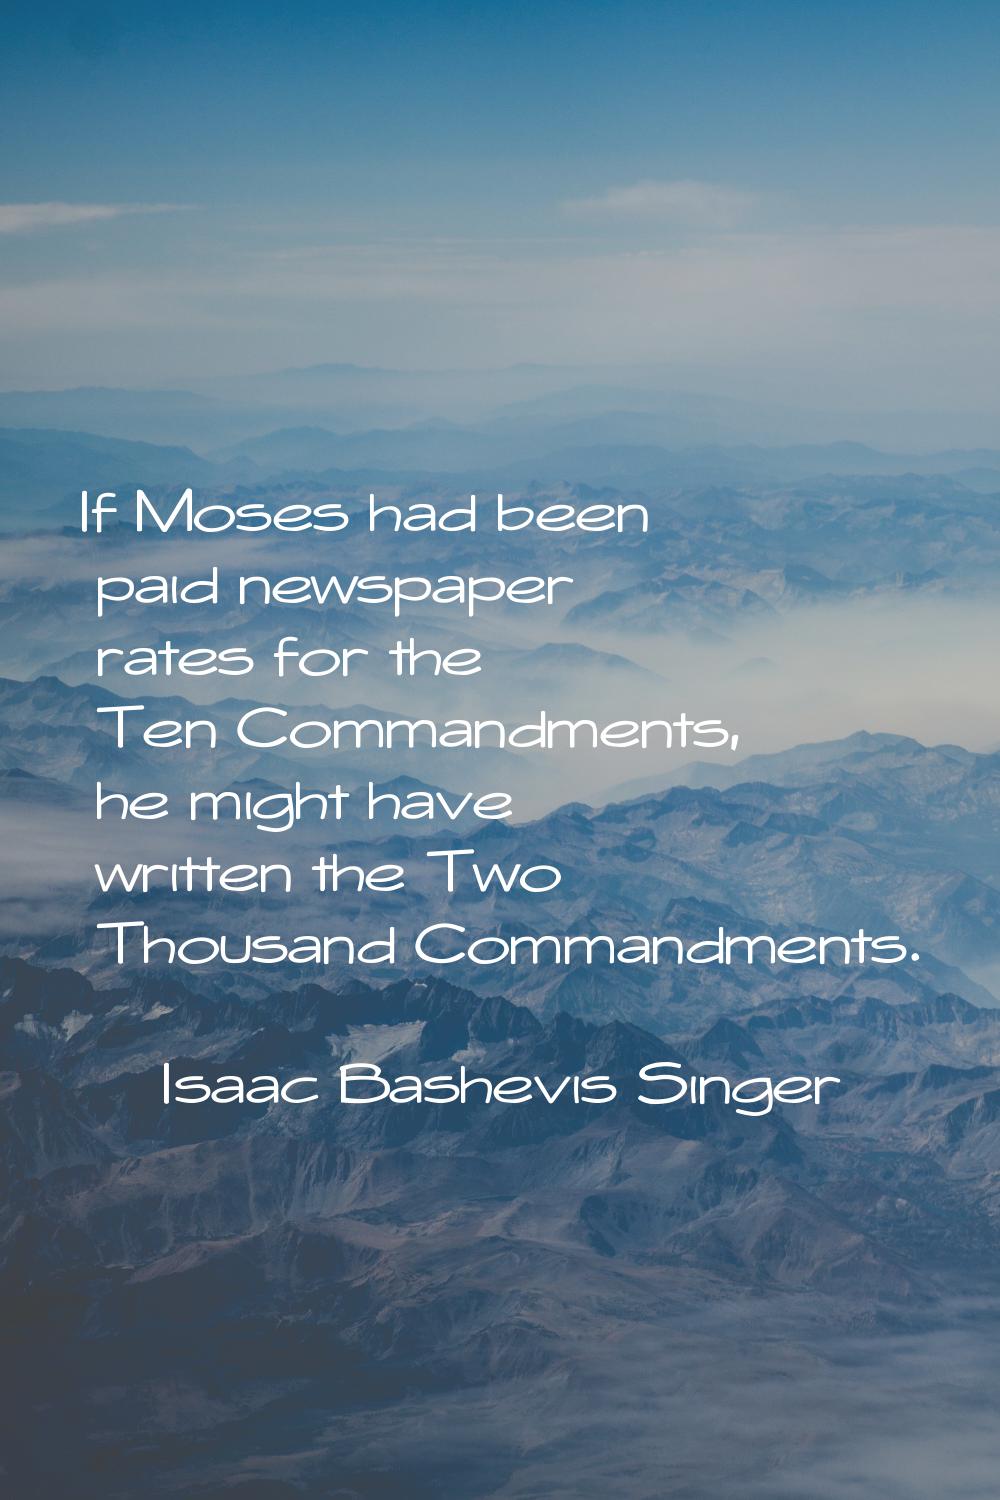 If Moses had been paid newspaper rates for the Ten Commandments, he might have written the Two Thou